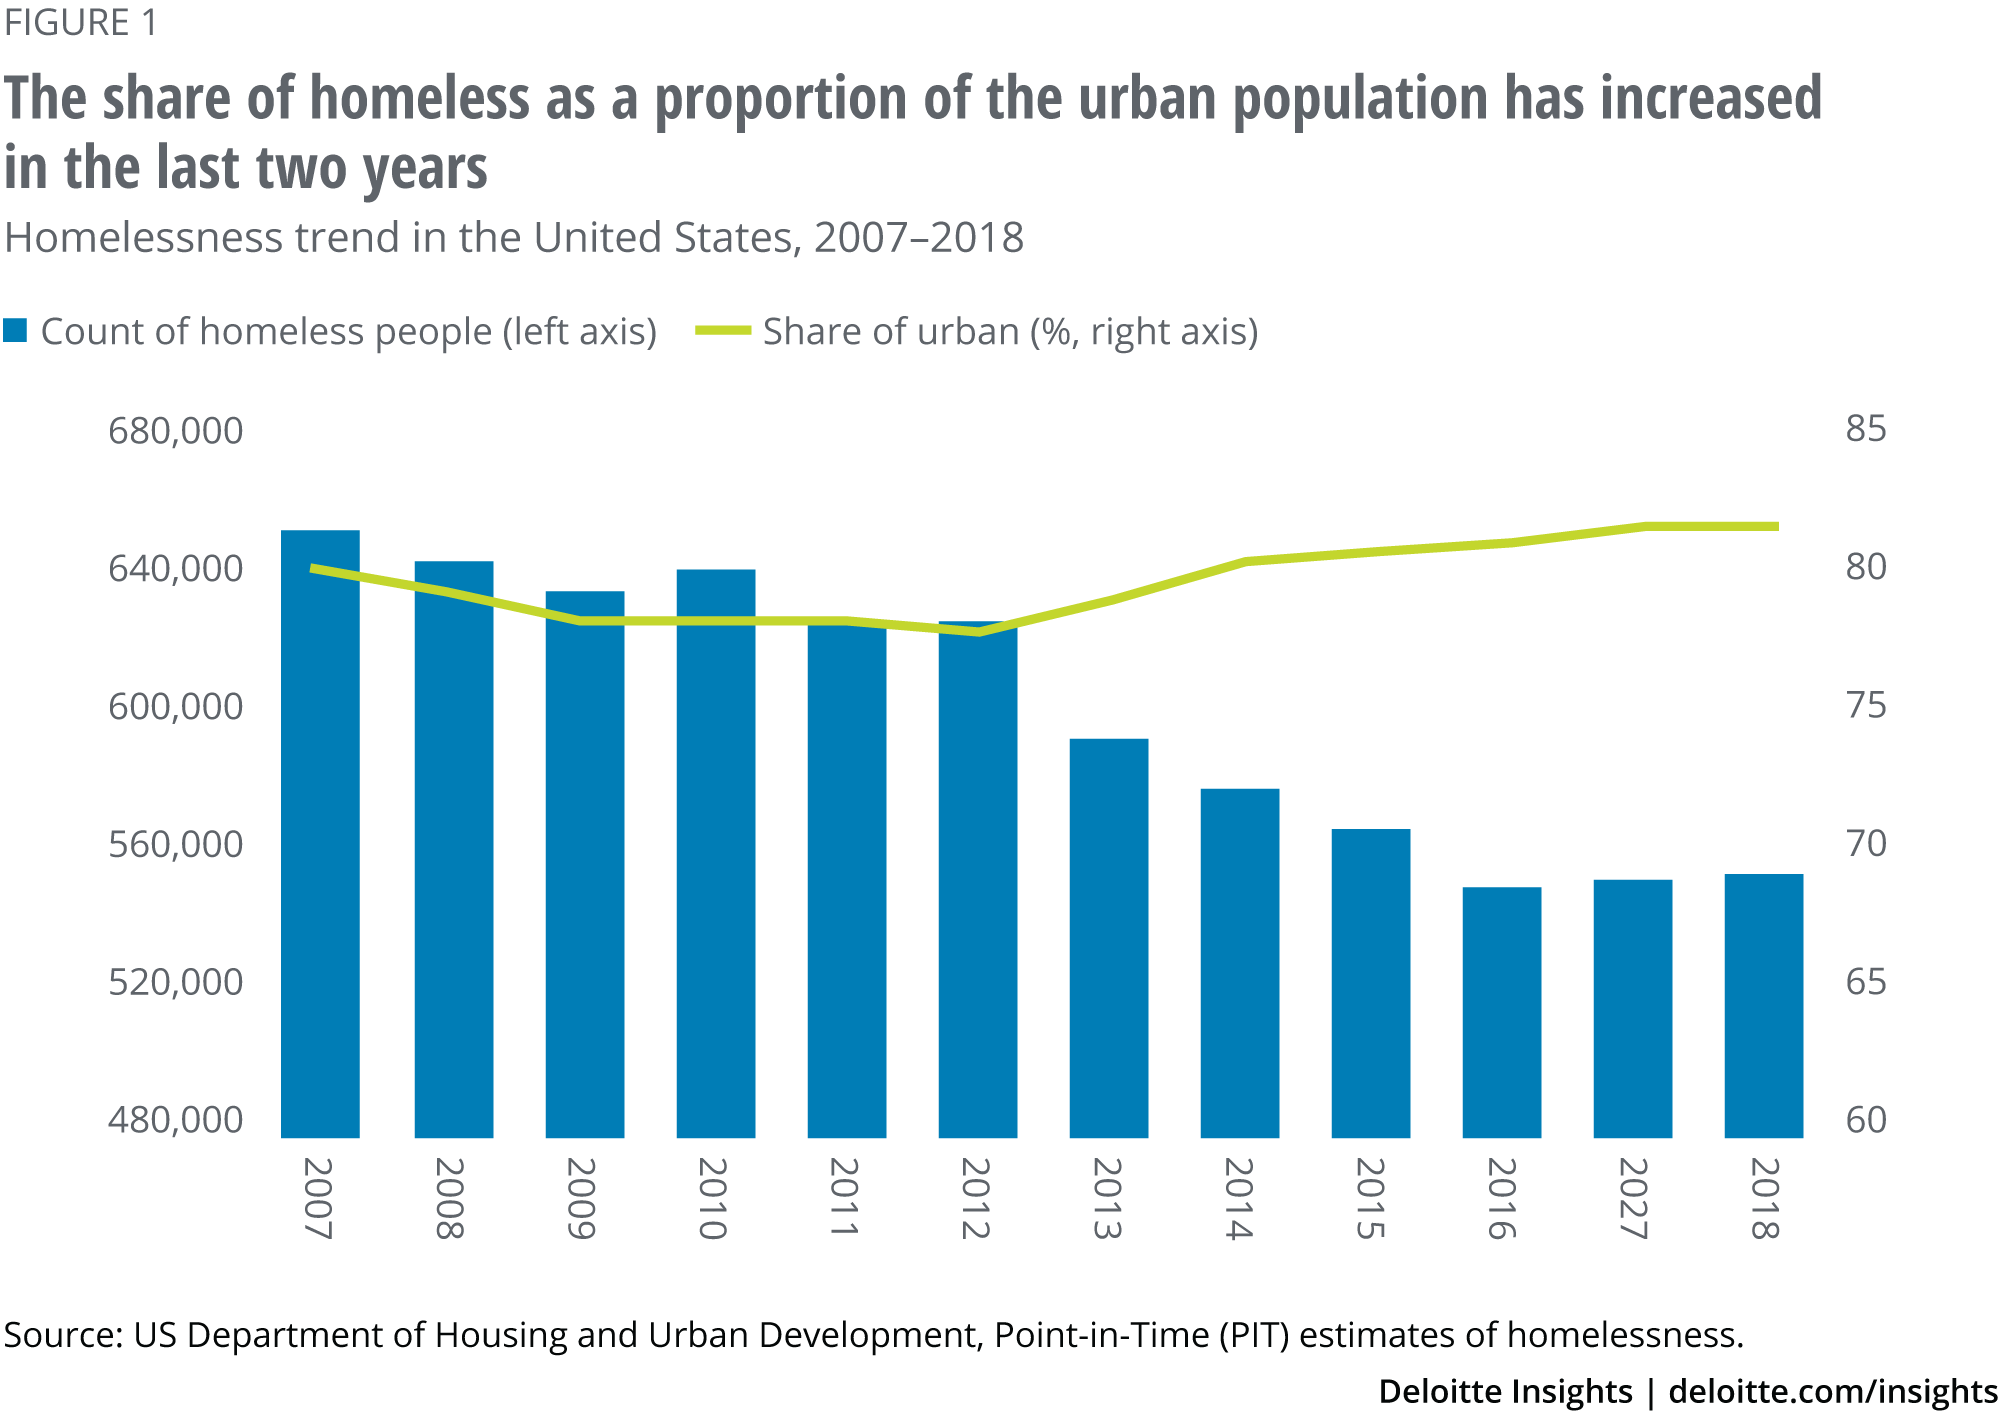 The share of homeless as a proportion of the urban population has increased in the last two years